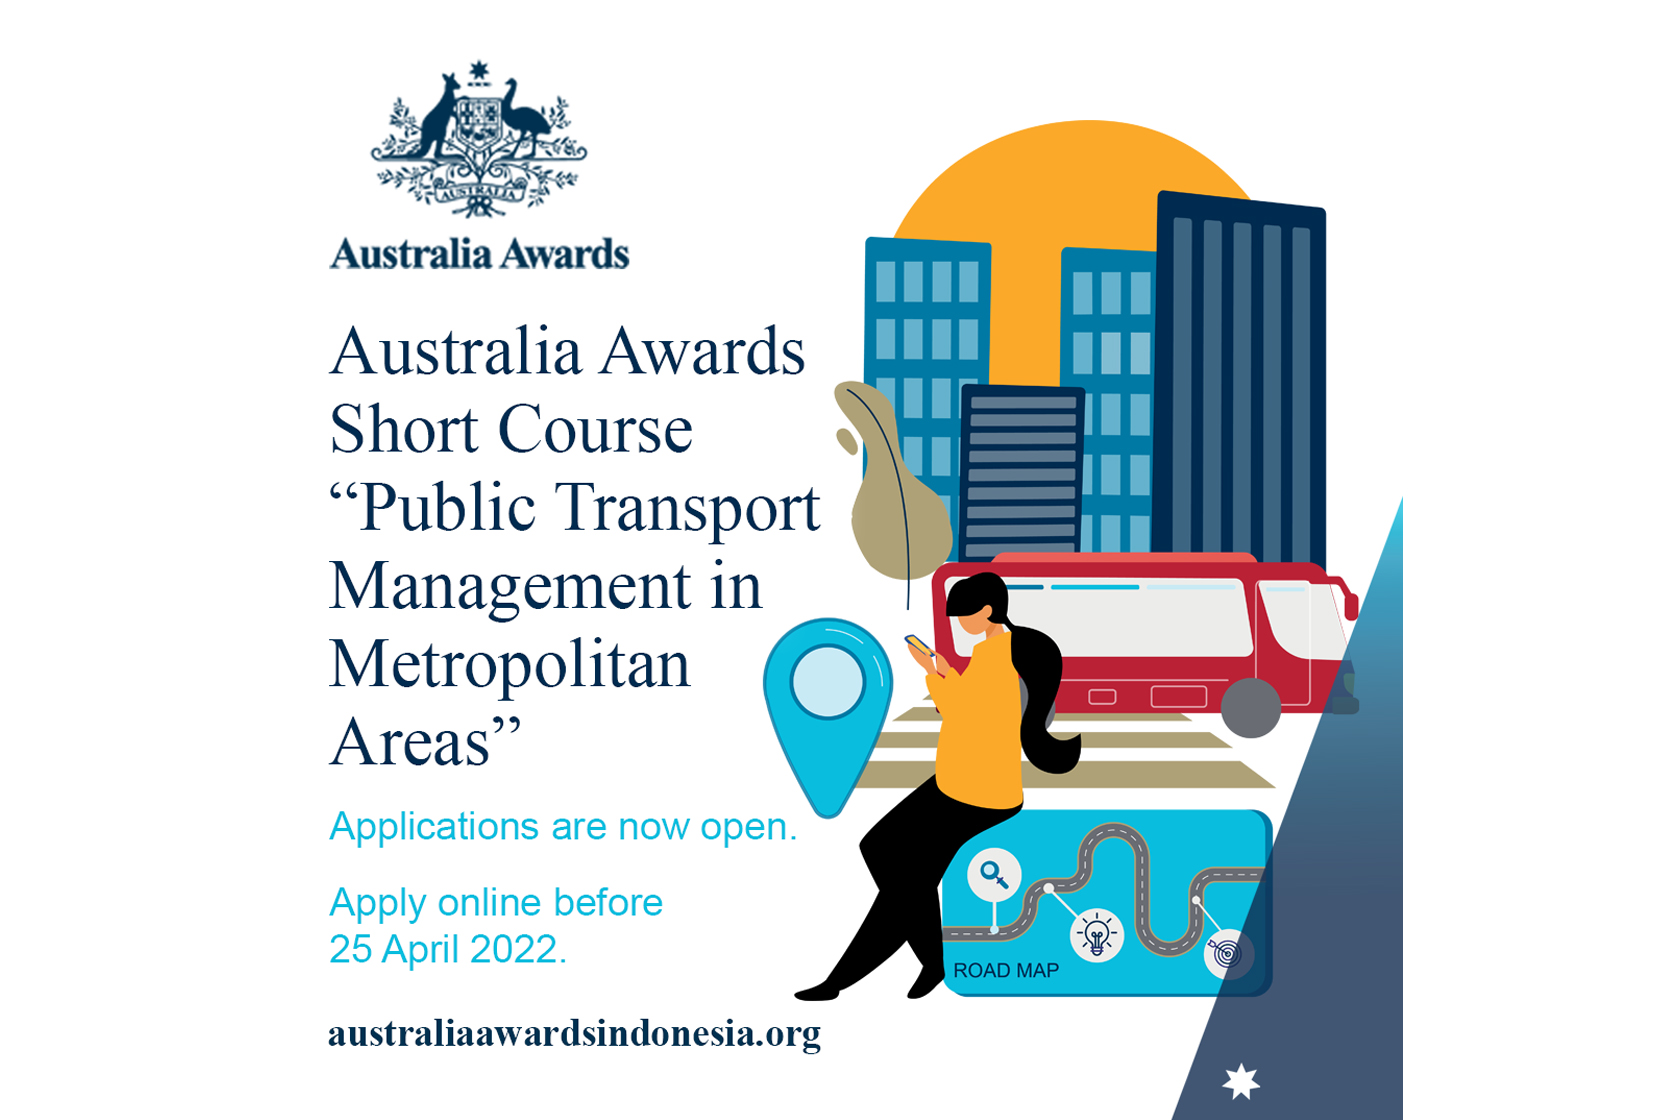 Applications Open for the Australia Awards Short Course on Public Transport Management in Metropolitan Areas